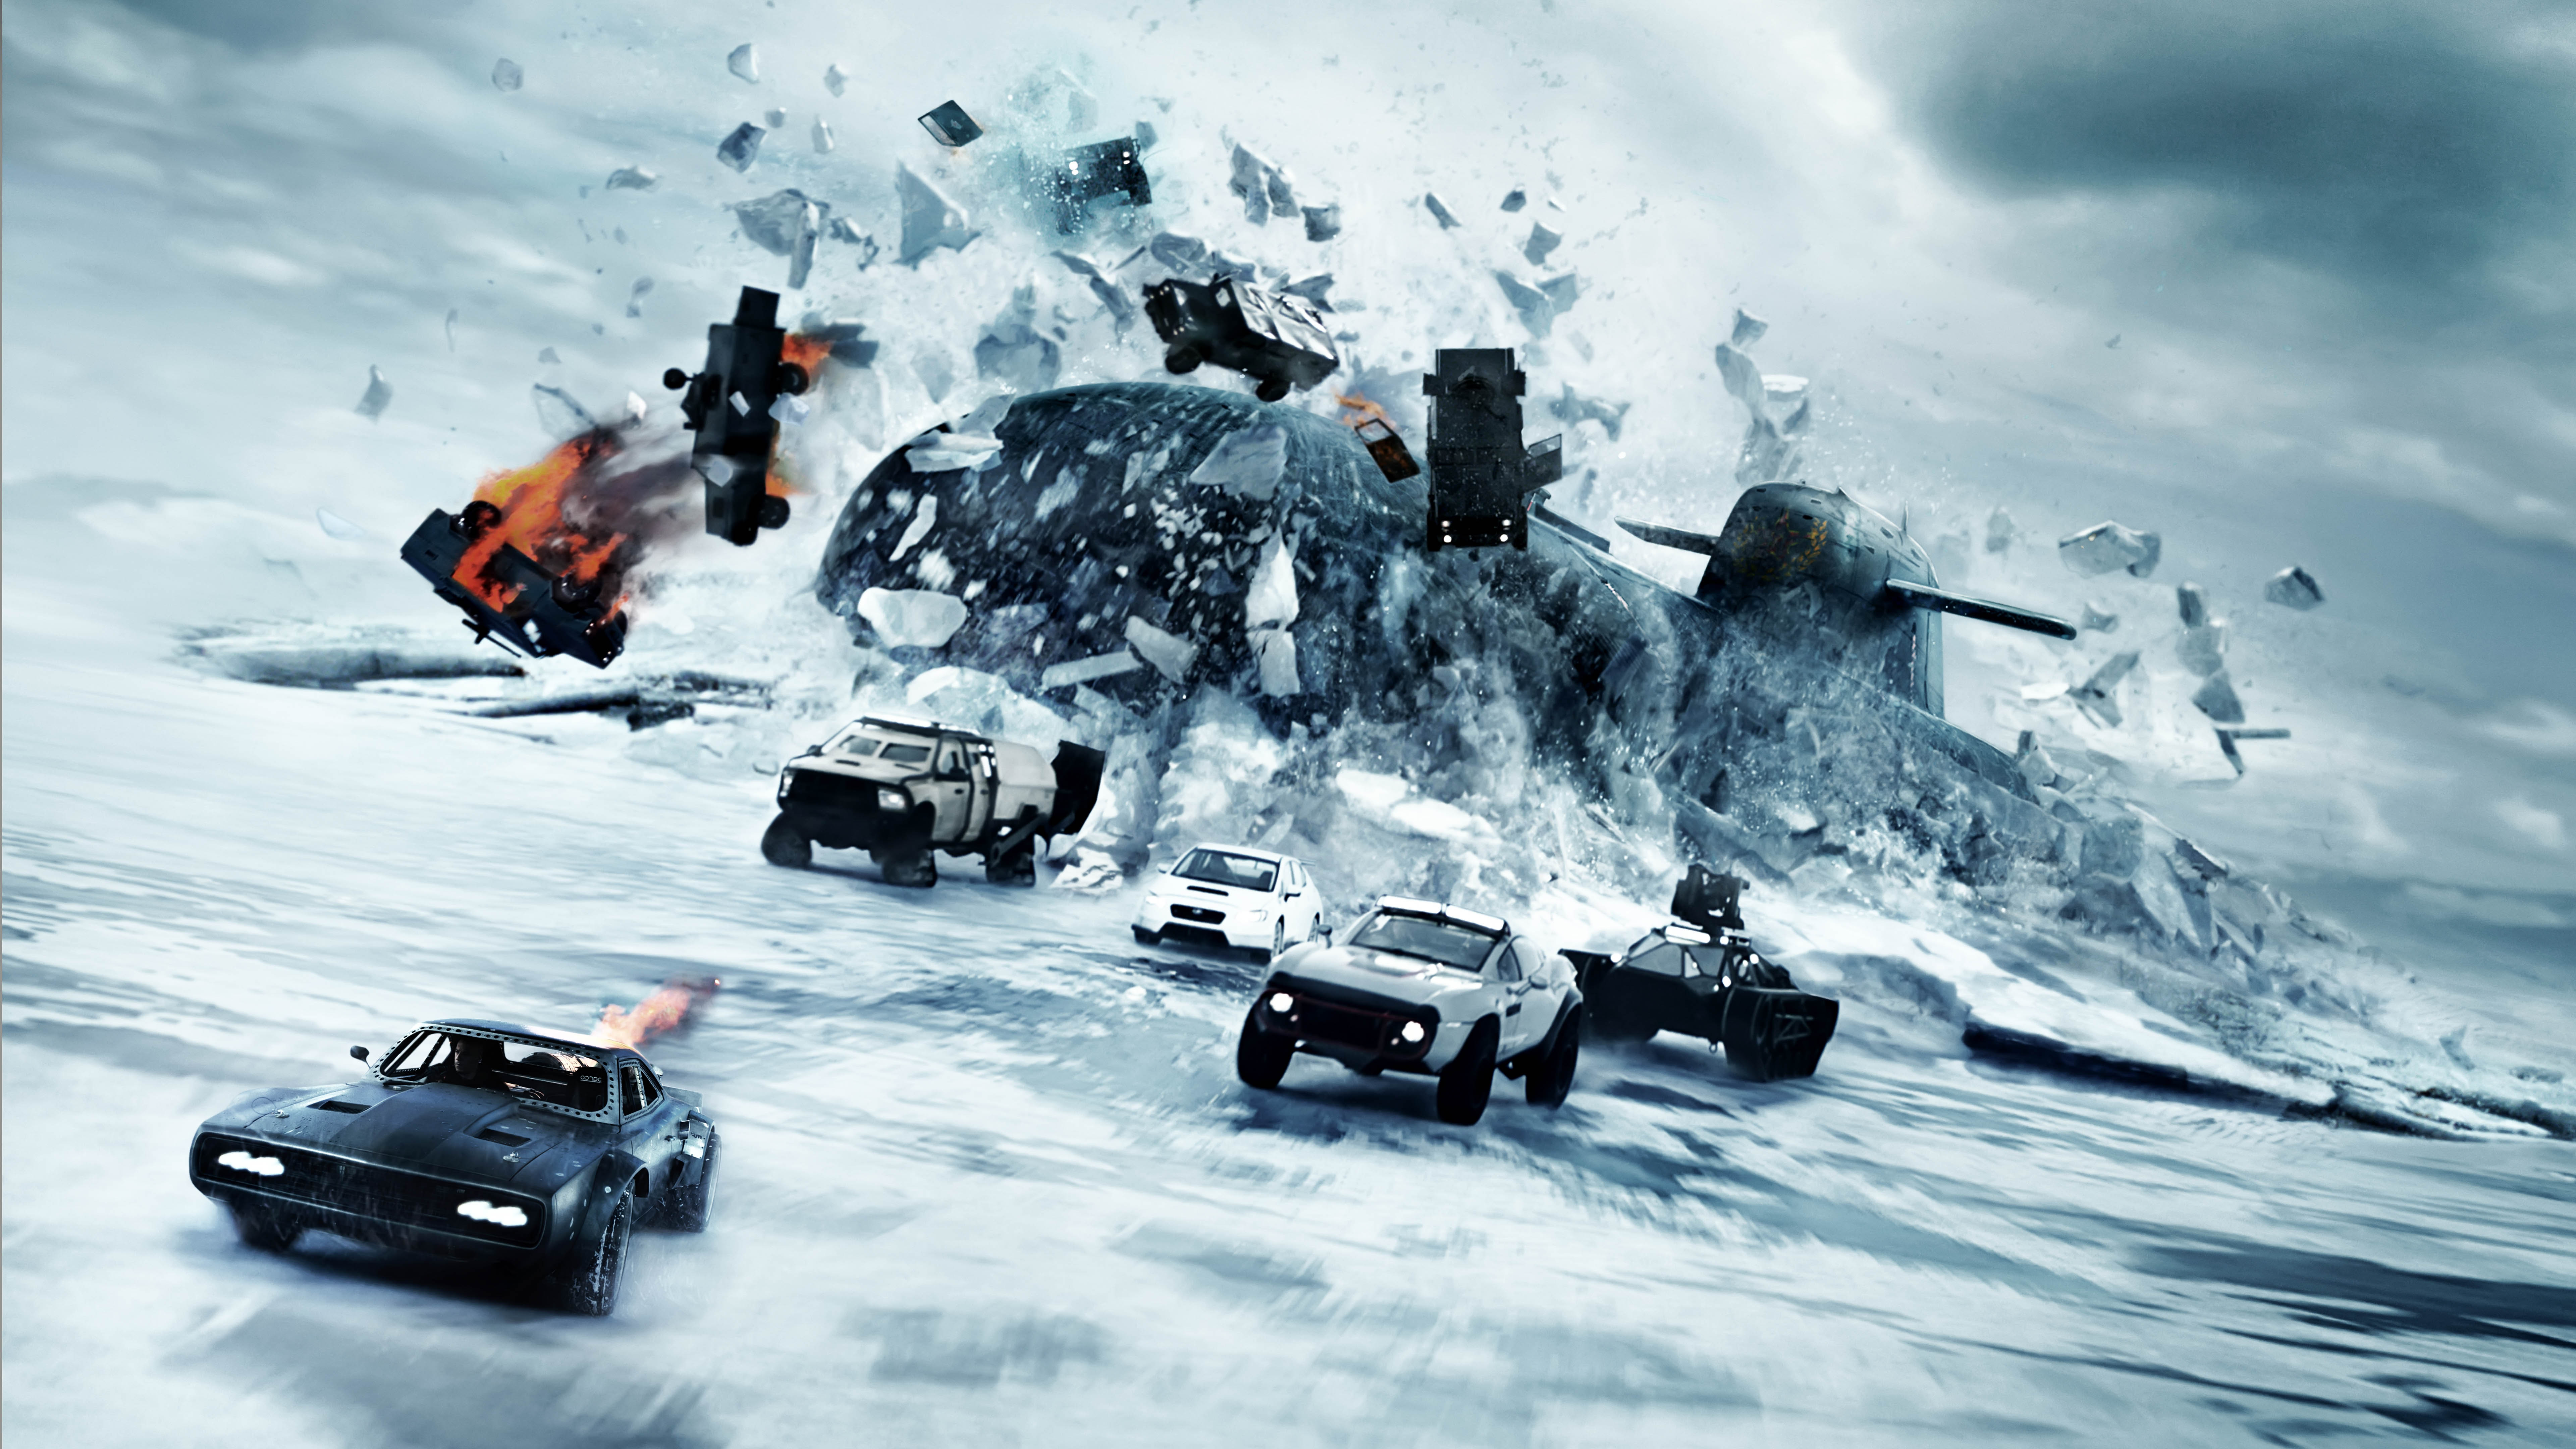 The Fate Of The Furious Wallpapers On Ewallpapers 